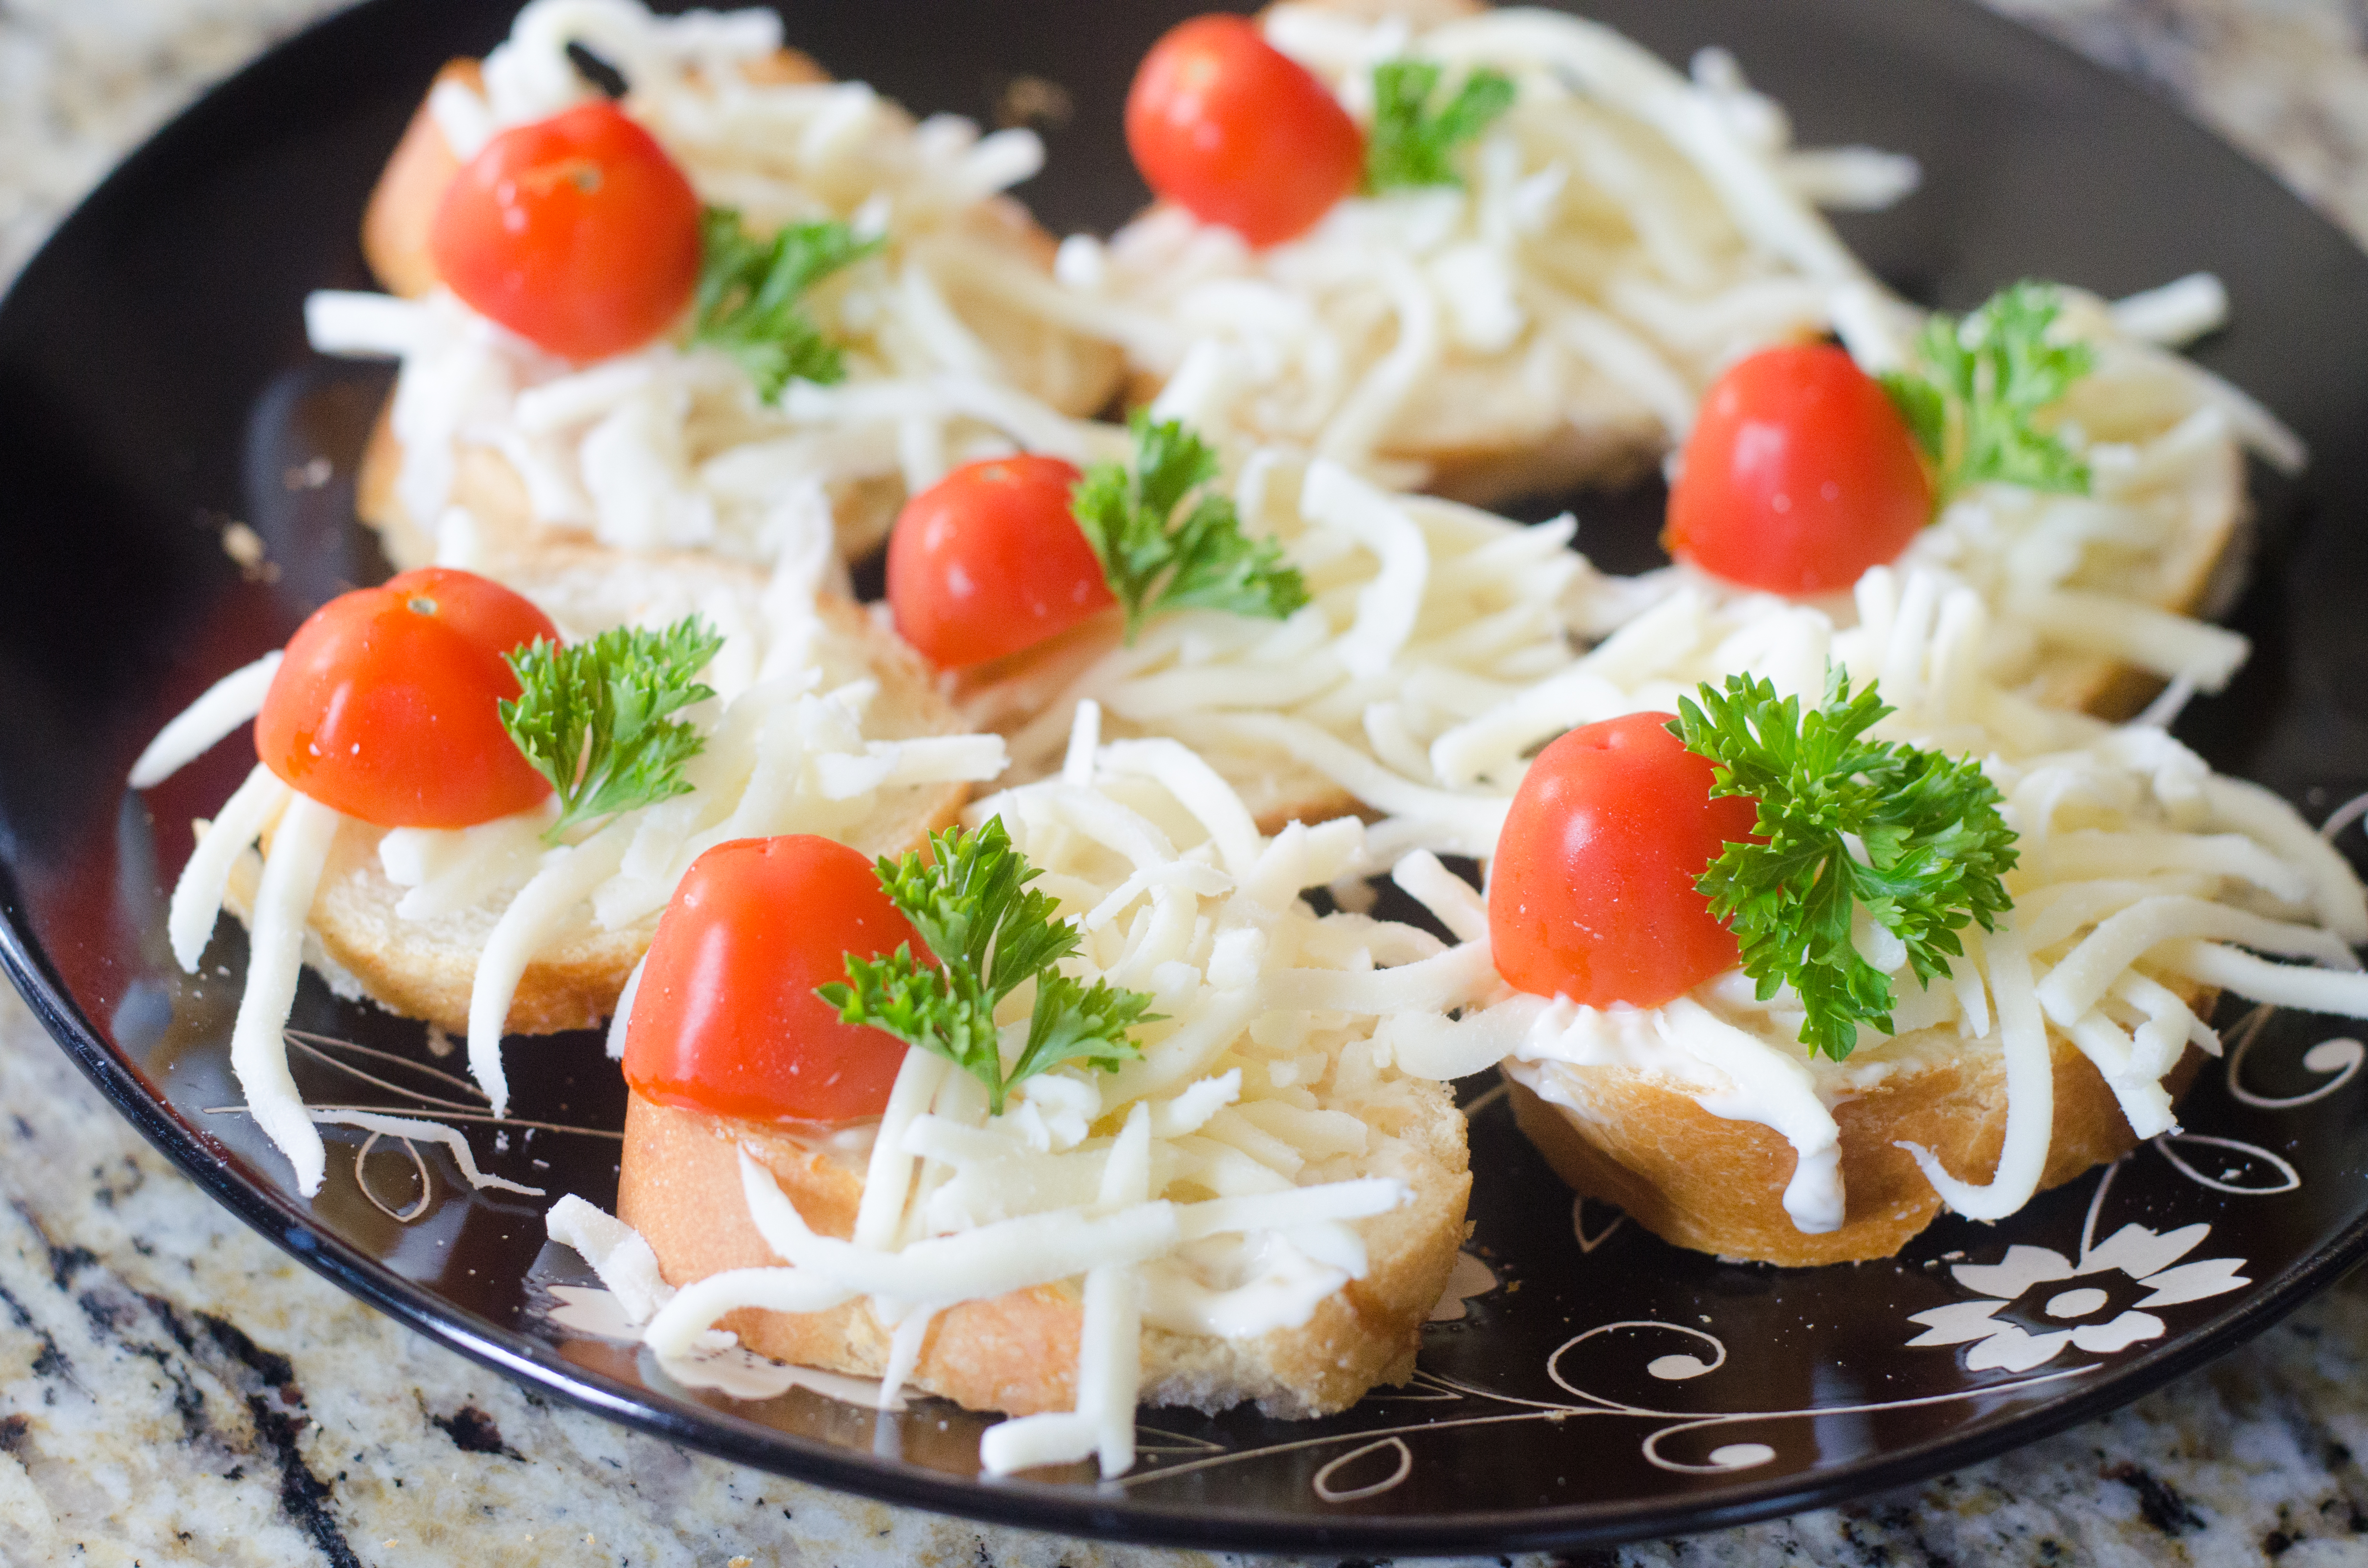 Need a simple appetizer for your next get together? This Parmesan topped appetizer is too good not to serve your friends and family. 